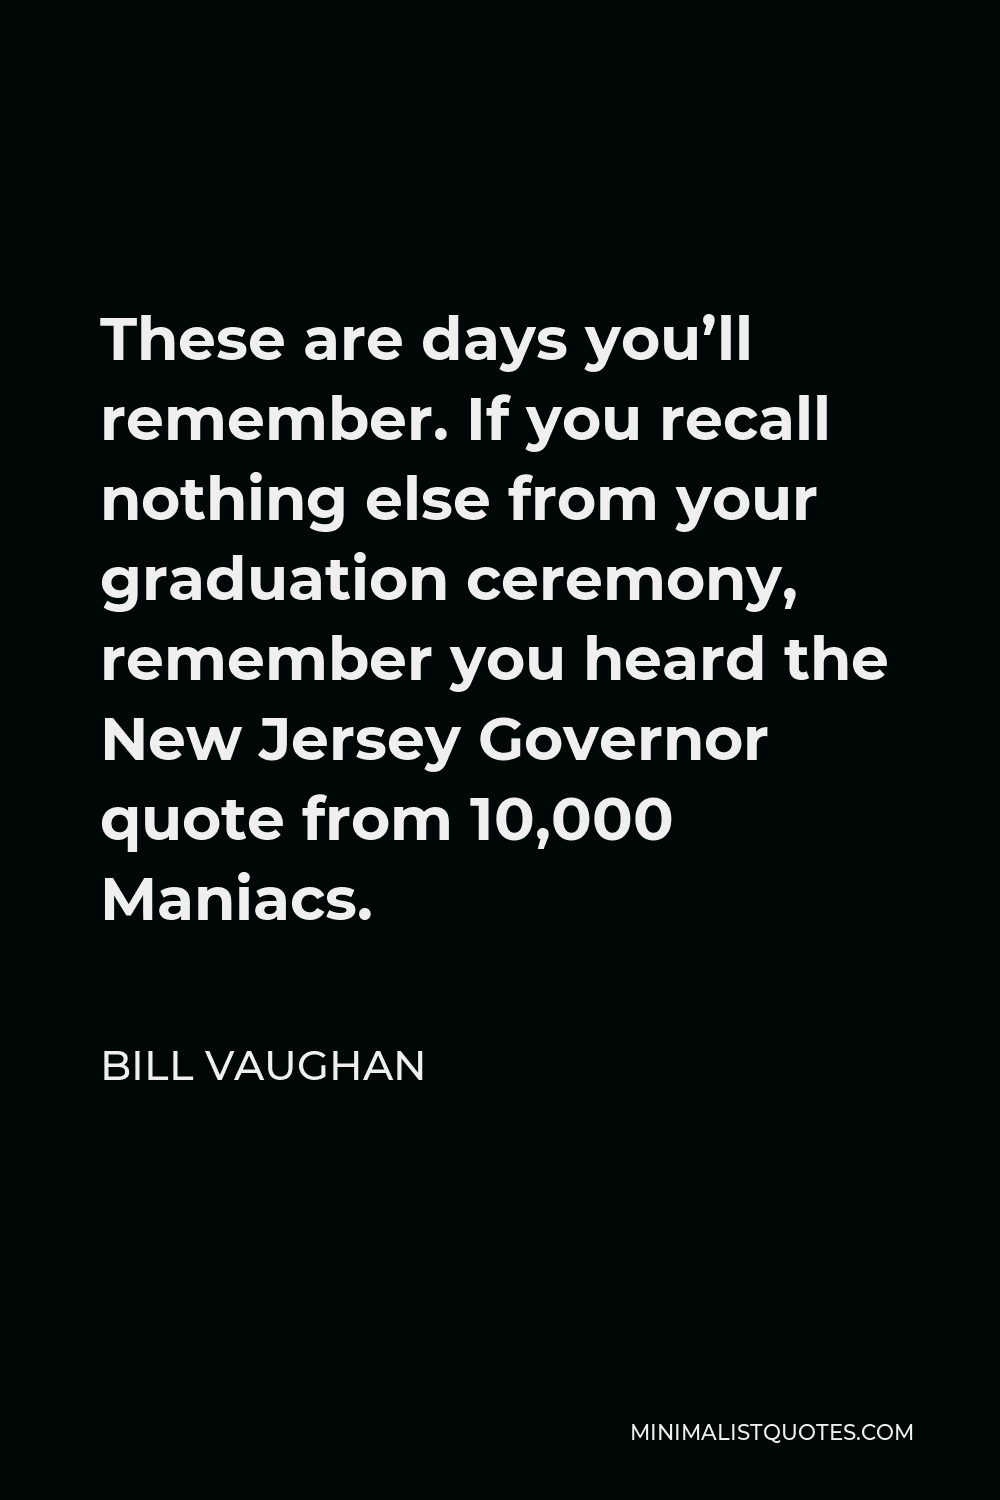 Bill Vaughan Quote - These are days you’ll remember. If you recall nothing else from your graduation ceremony, remember you heard the New Jersey Governor quote from 10,000 Maniacs.